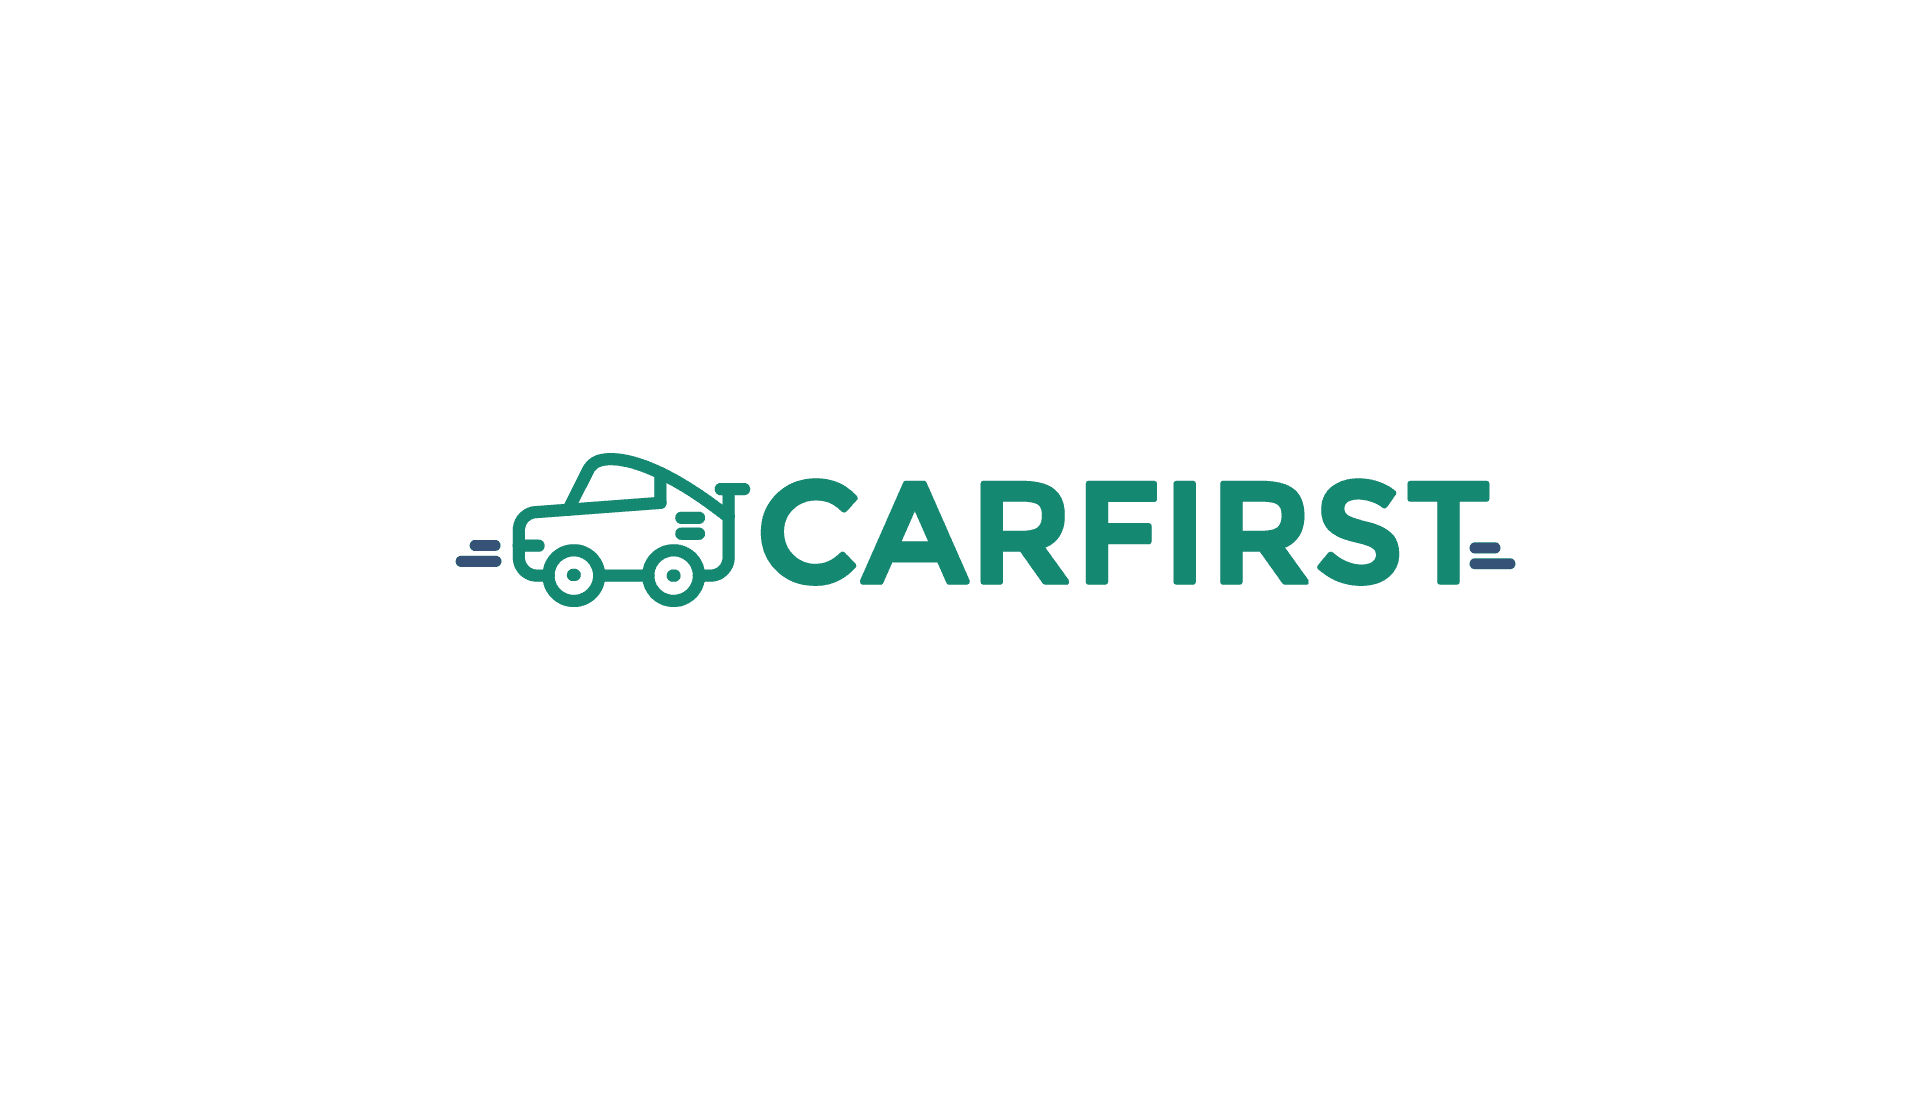 CarFirst Launches Their Flagship Inspection Center Sell Your Car within an hour with CarFirst